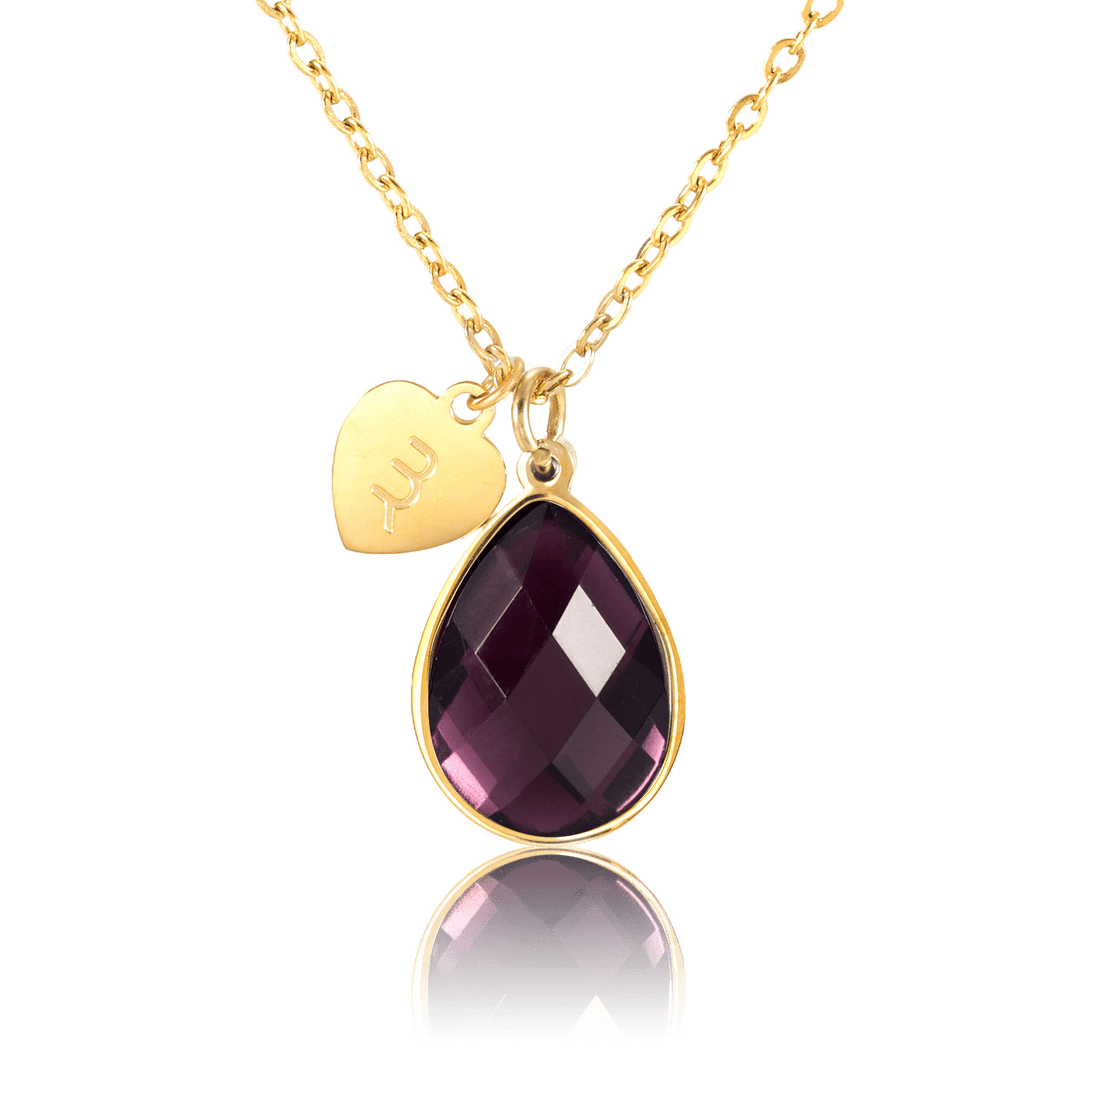 bianco rosso Necklaces Gold February Birthstone - Amethyst cyprus greece jewelry gift free shipping europe worldwide